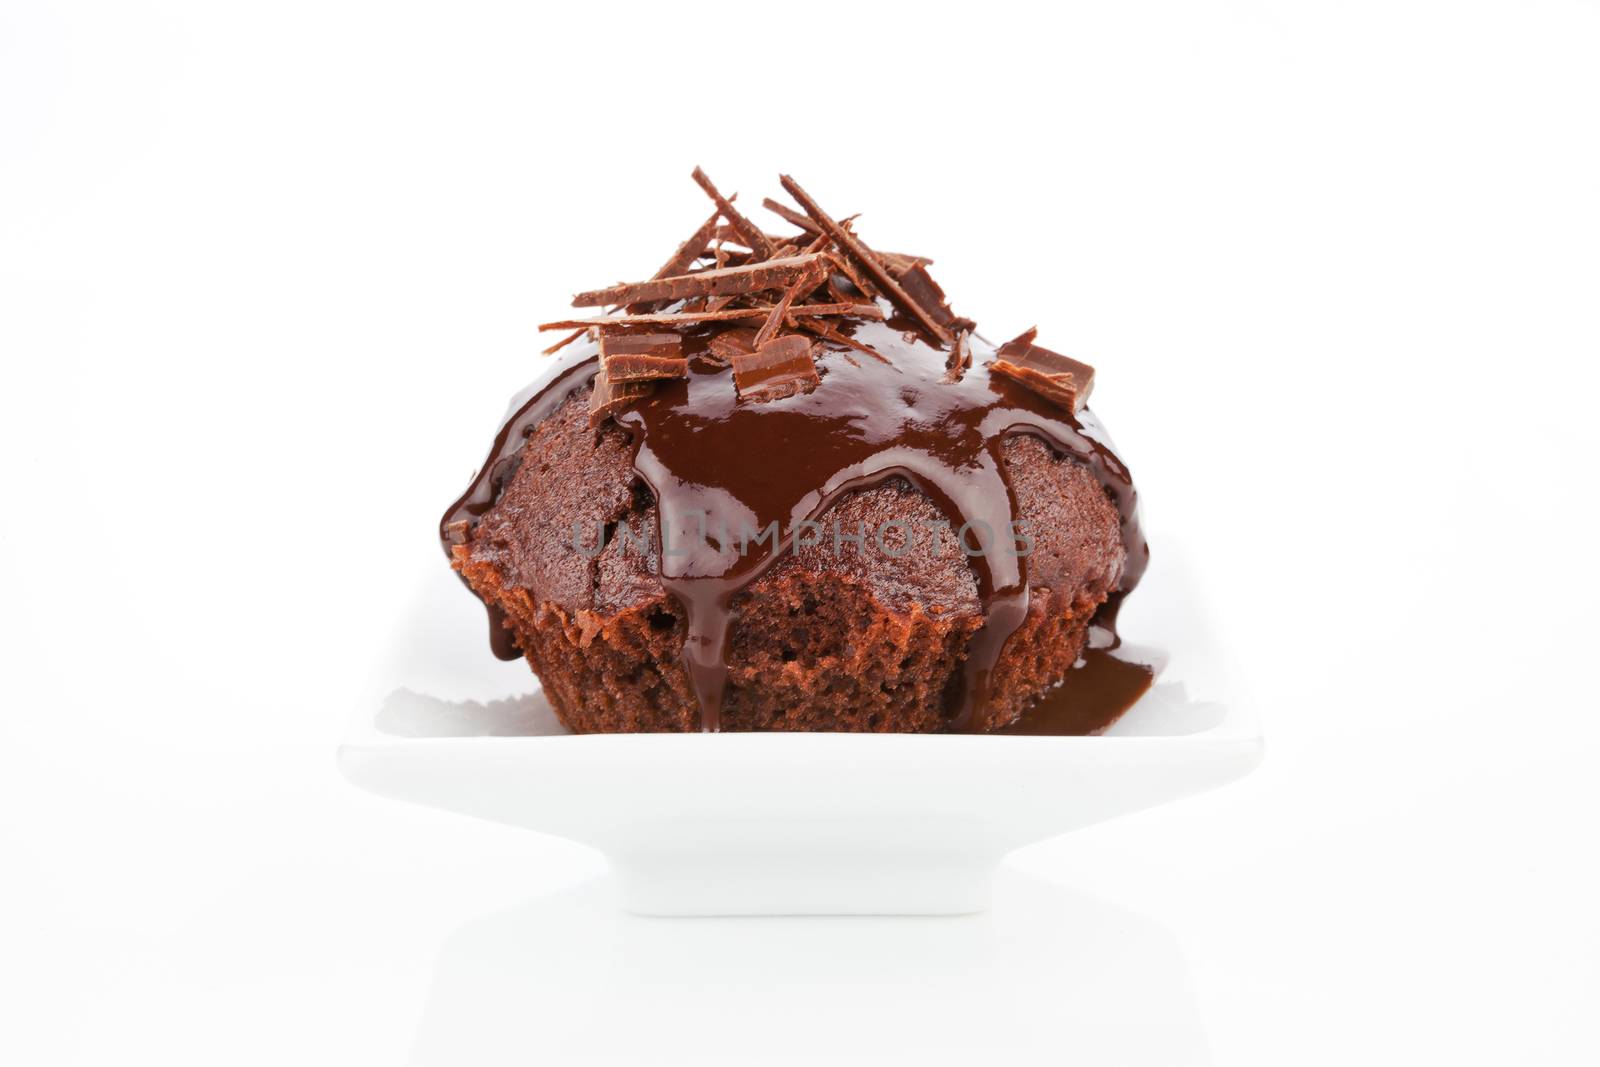 Delicious chocolate muffin with chocolate garnish isolated on white background.